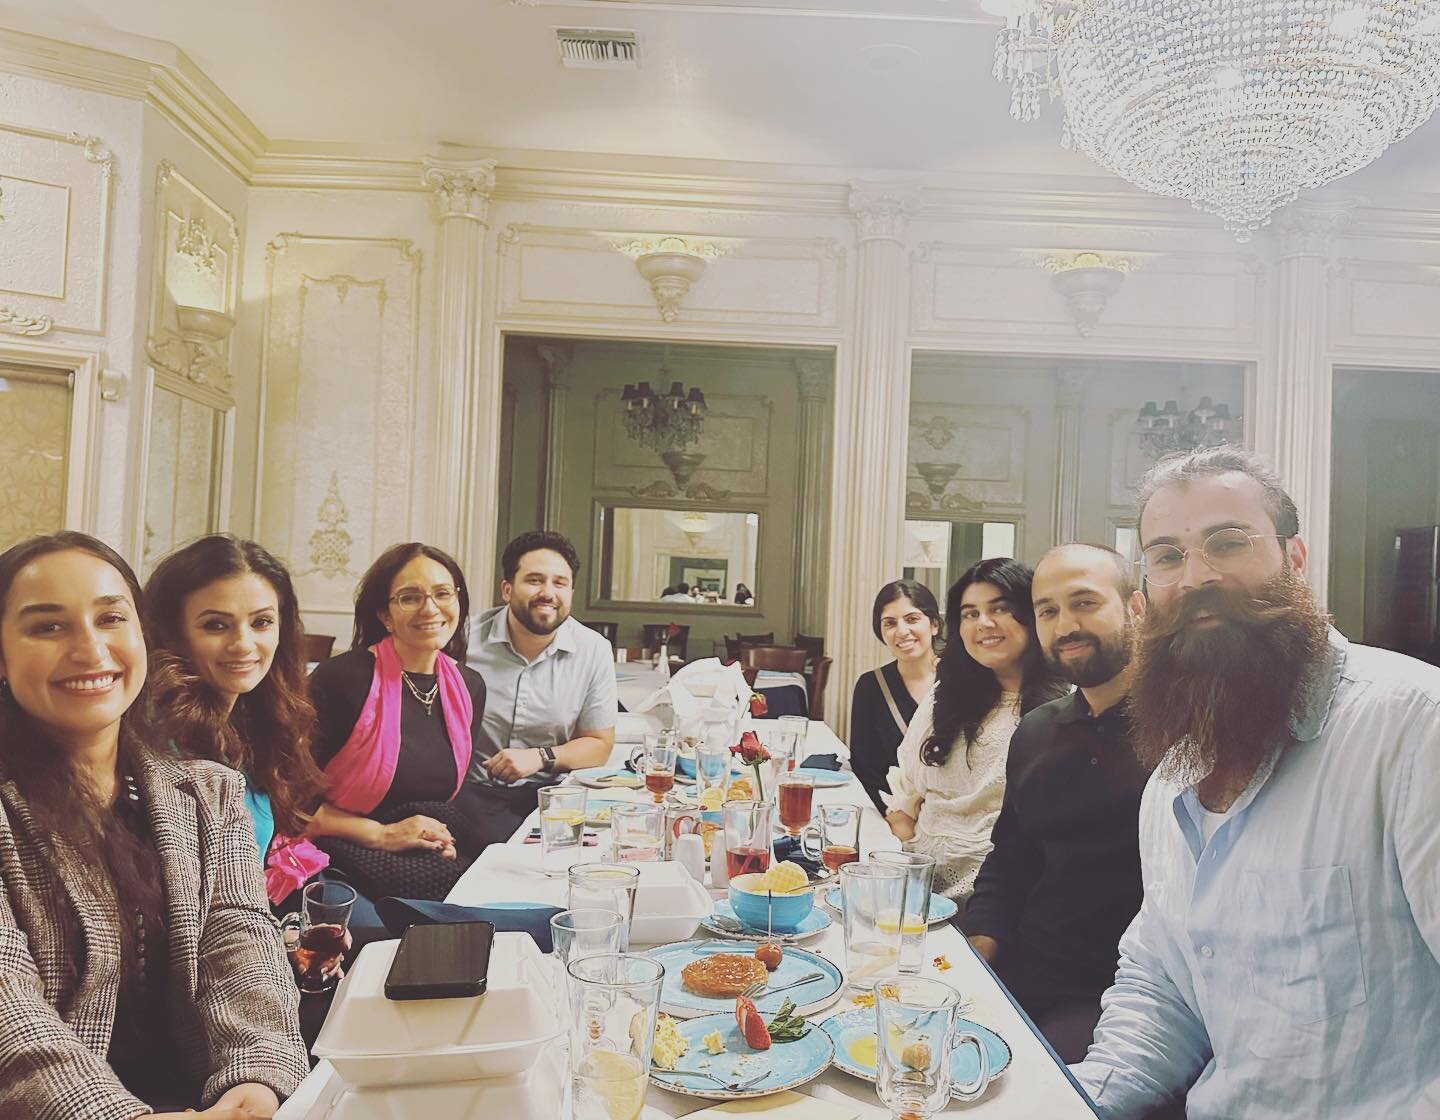 Afghan Refugee Relief board members @moj_rafiq @zolei1 @salmoney @iman.og had the distinct pleasure of attending an intimate dinner with @welcome.us CEO Nazanin Ash along with other @welcome.us senior staff @iserinakhan, @alisidkhan and @afghanameric